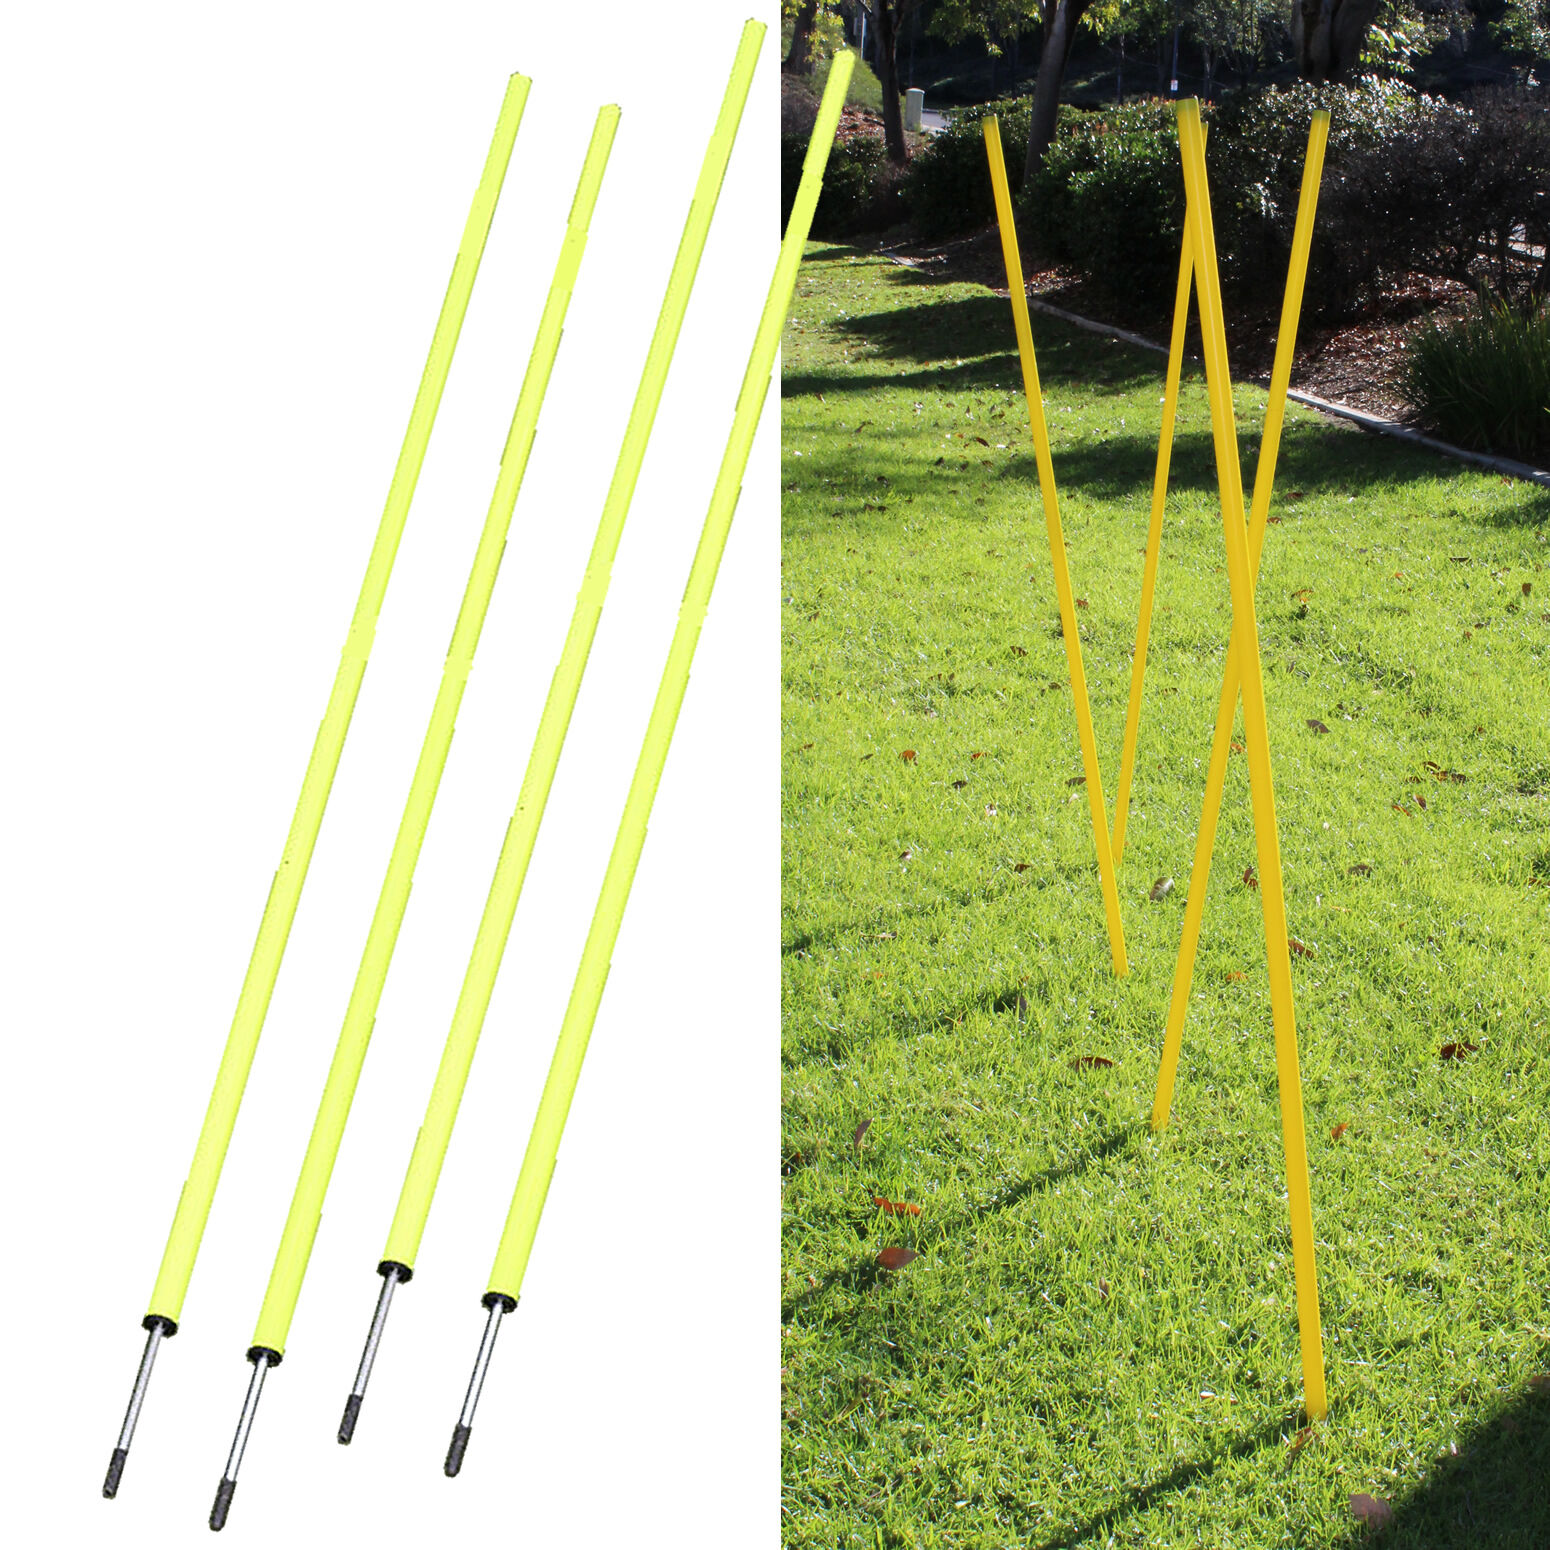 4 Agility Poles Portable Outdoor Training Markers Obstacle football soccer coach